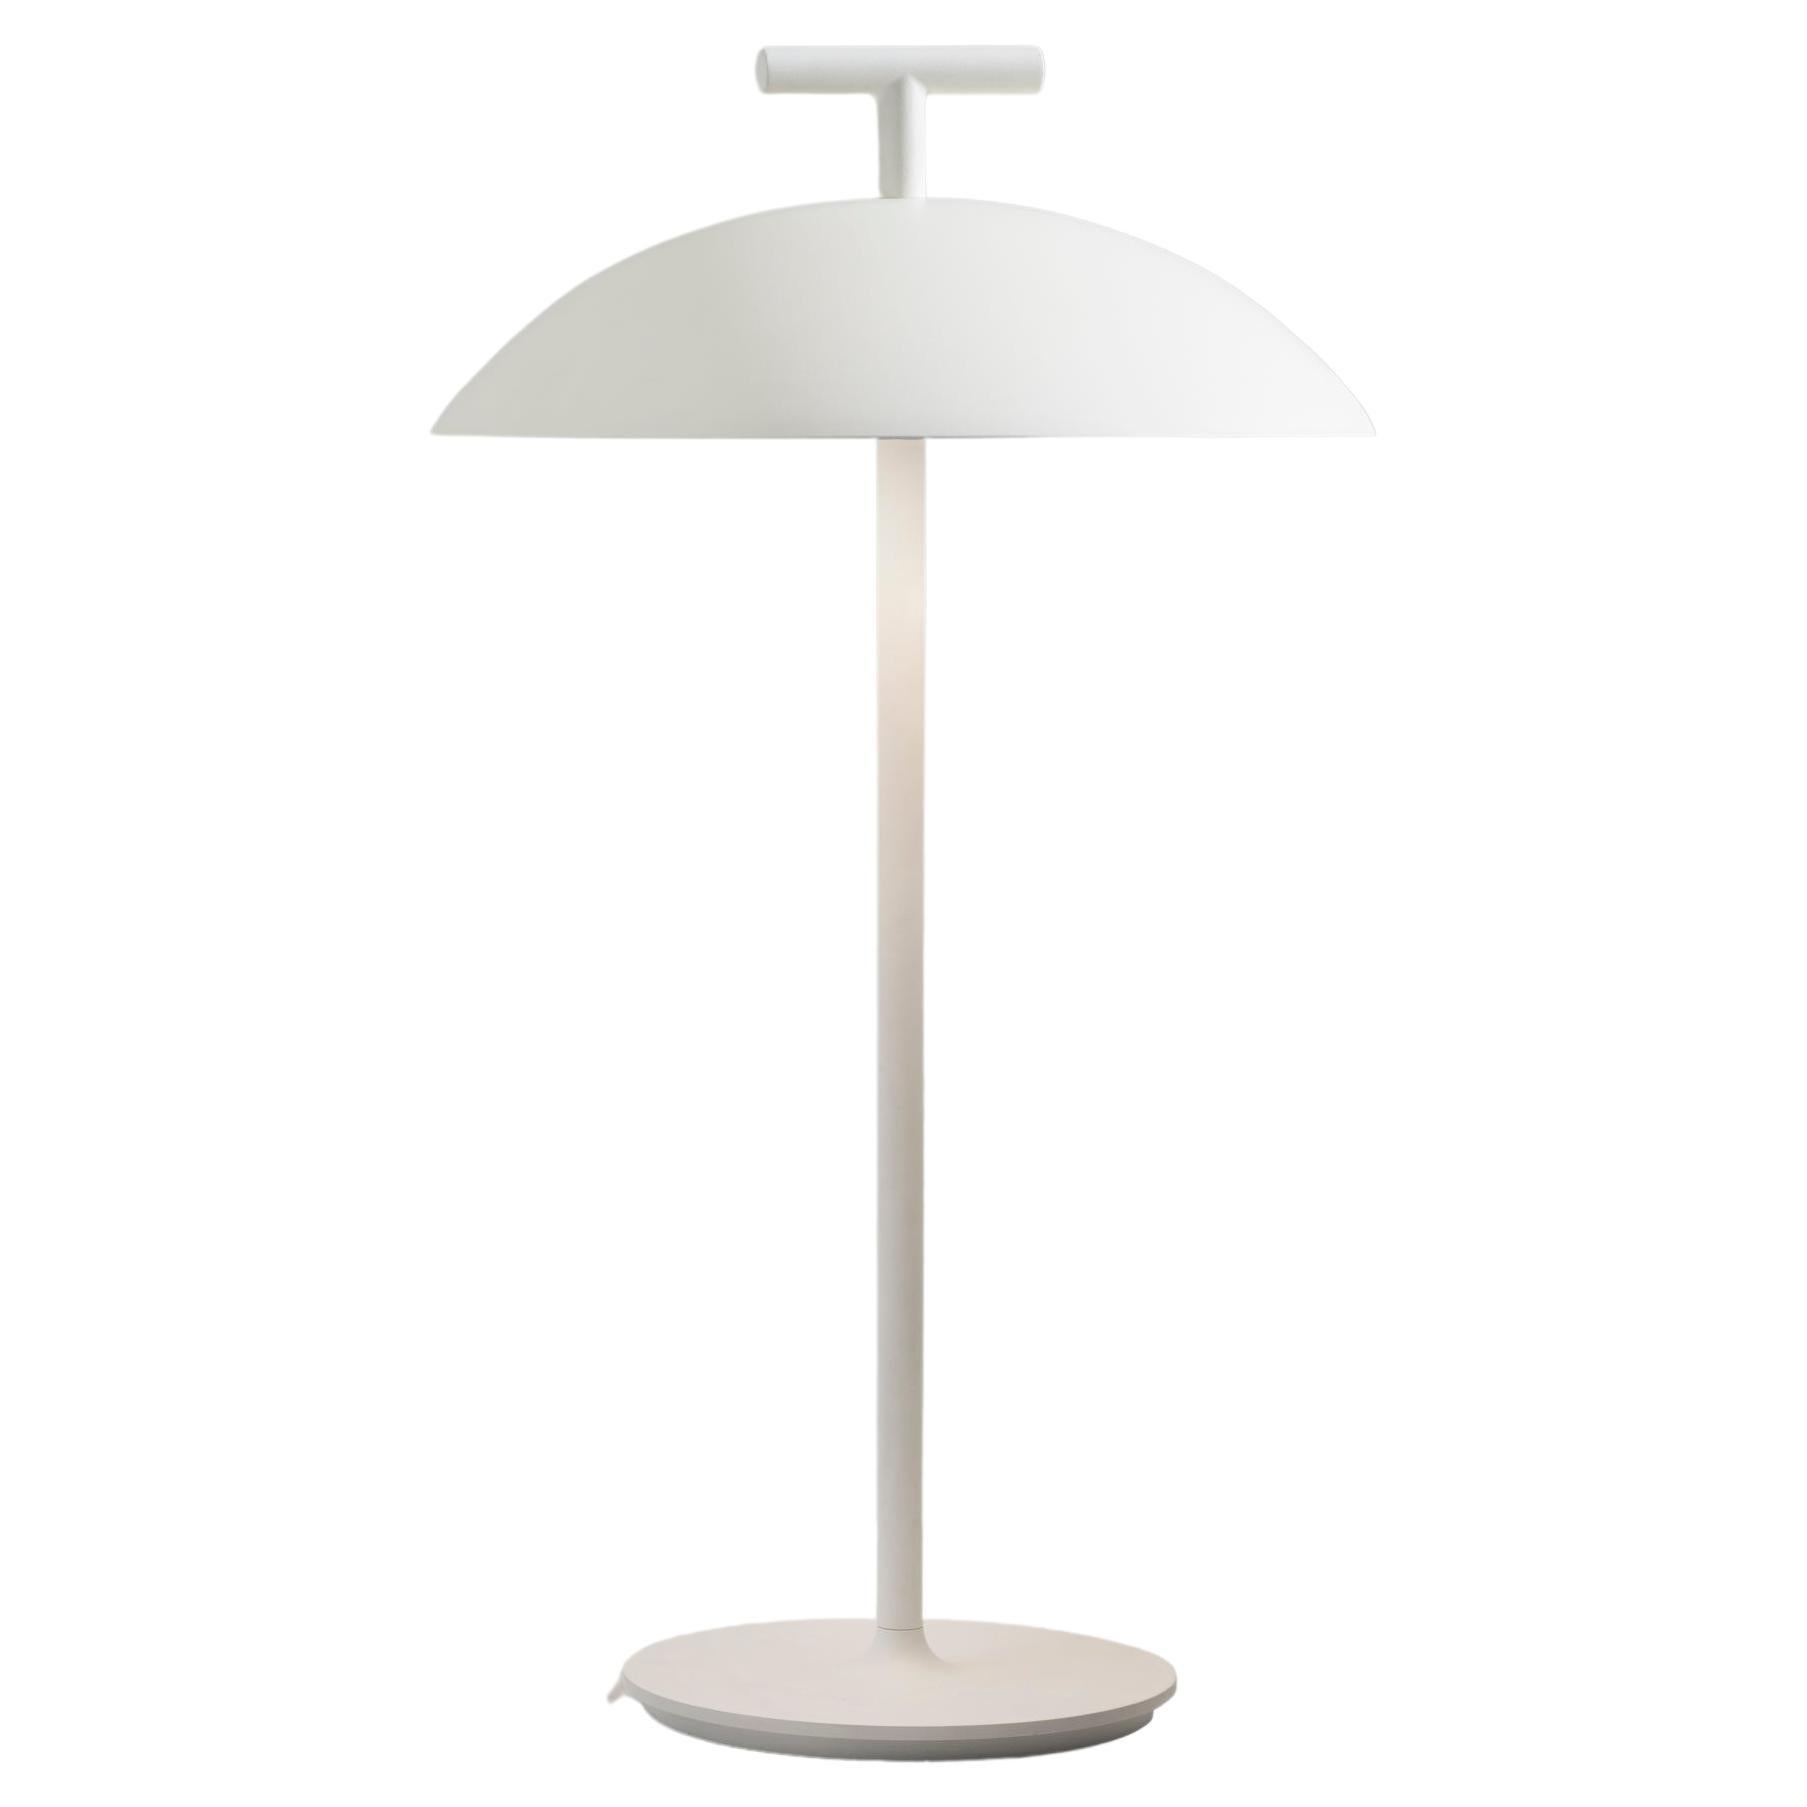 Geen-a is Kartell's first reading lamp, supplementing the brand’s lighting range with a product designed for this specific purpose. The simple lines conceal a real sense of attitude, while the clean shape – free from showy tech features – has a